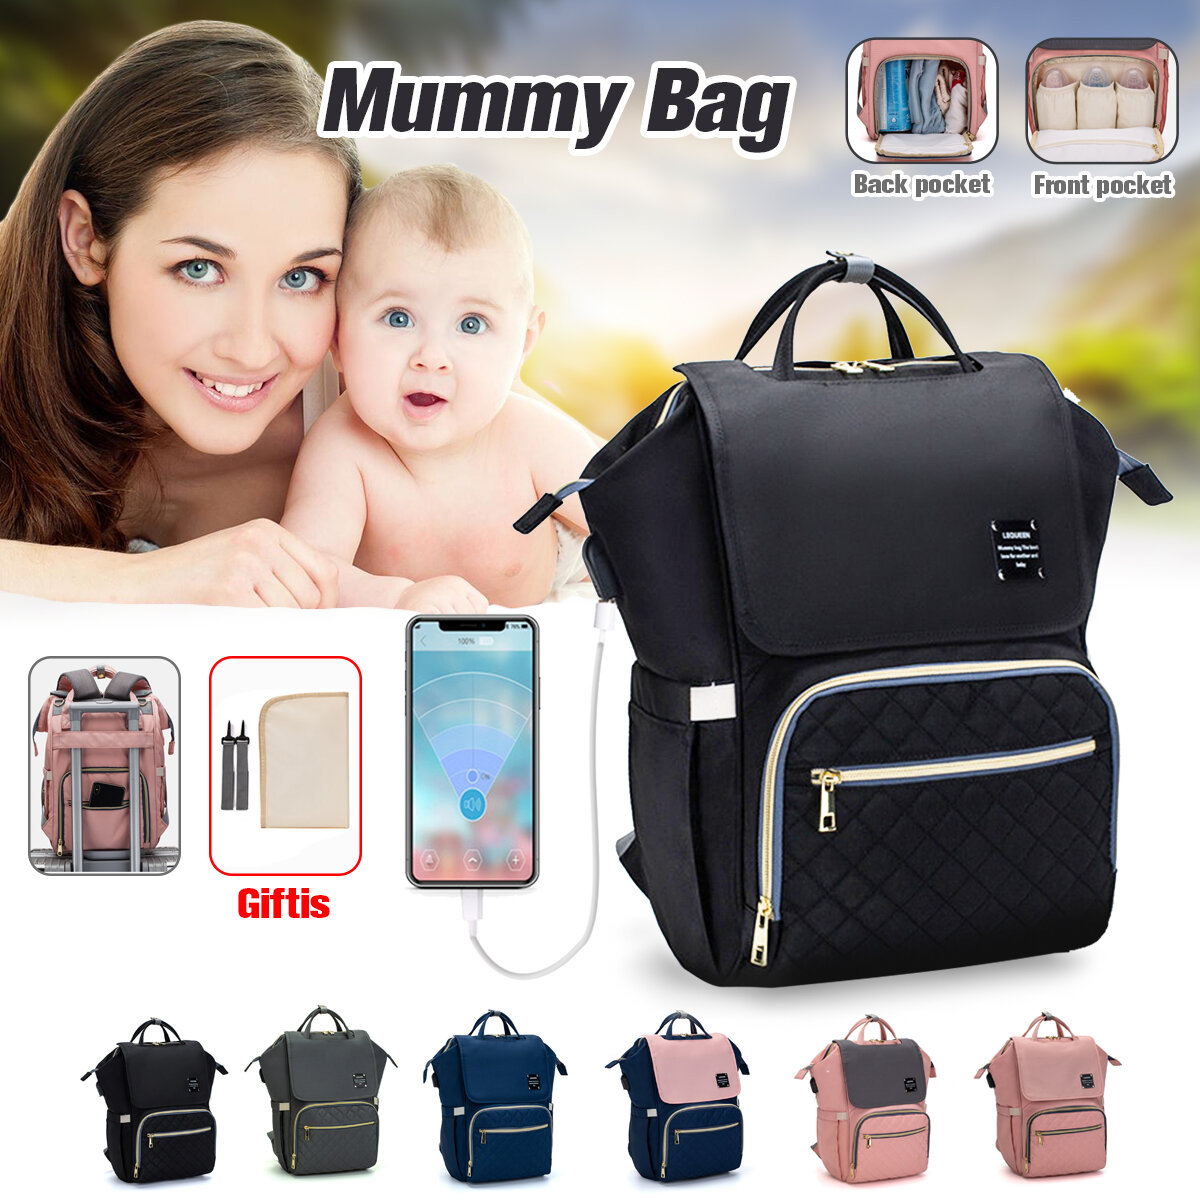 Image of [Upgrade Version] LEQUEEN Large Capacity Outdoor Trip Travel Diaper Storage with USB Charging Port Mummy Bag Backpack